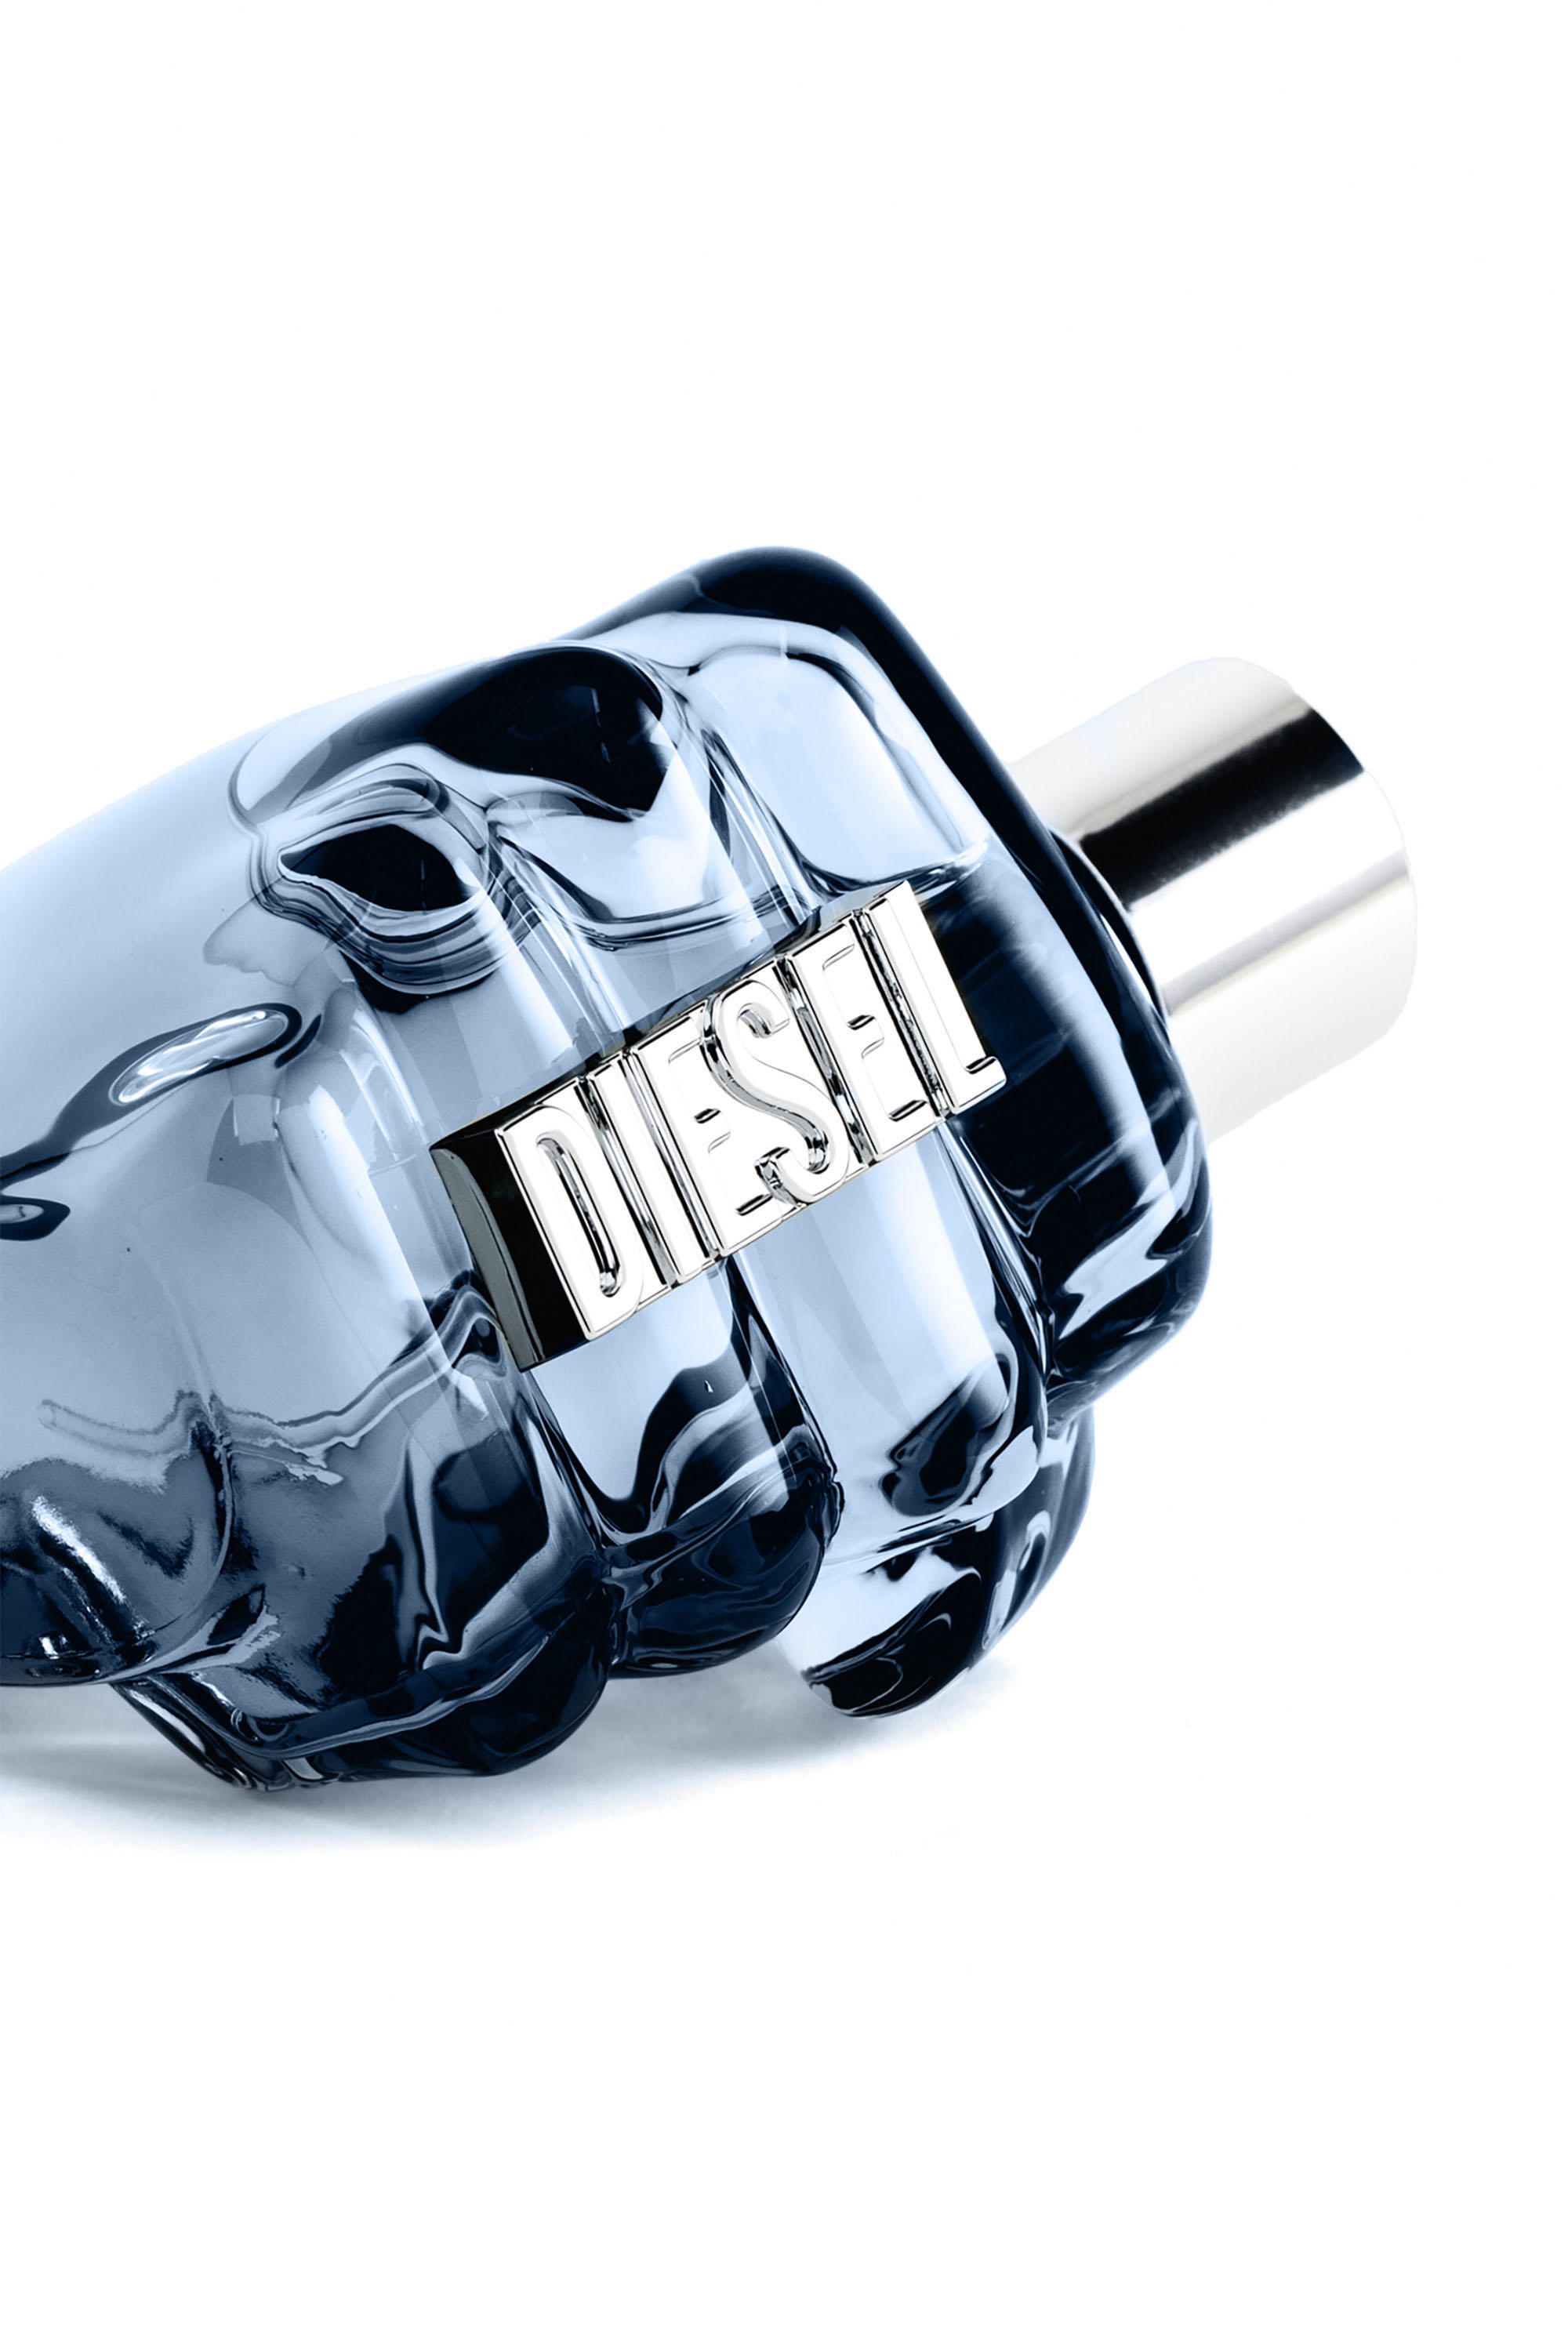 Diesel - ONLY THE BRAVE 50ML, Male Only The Brave 50ml, 1.7 FL.OZ., Eau de Toilette in ブルー - Image 3